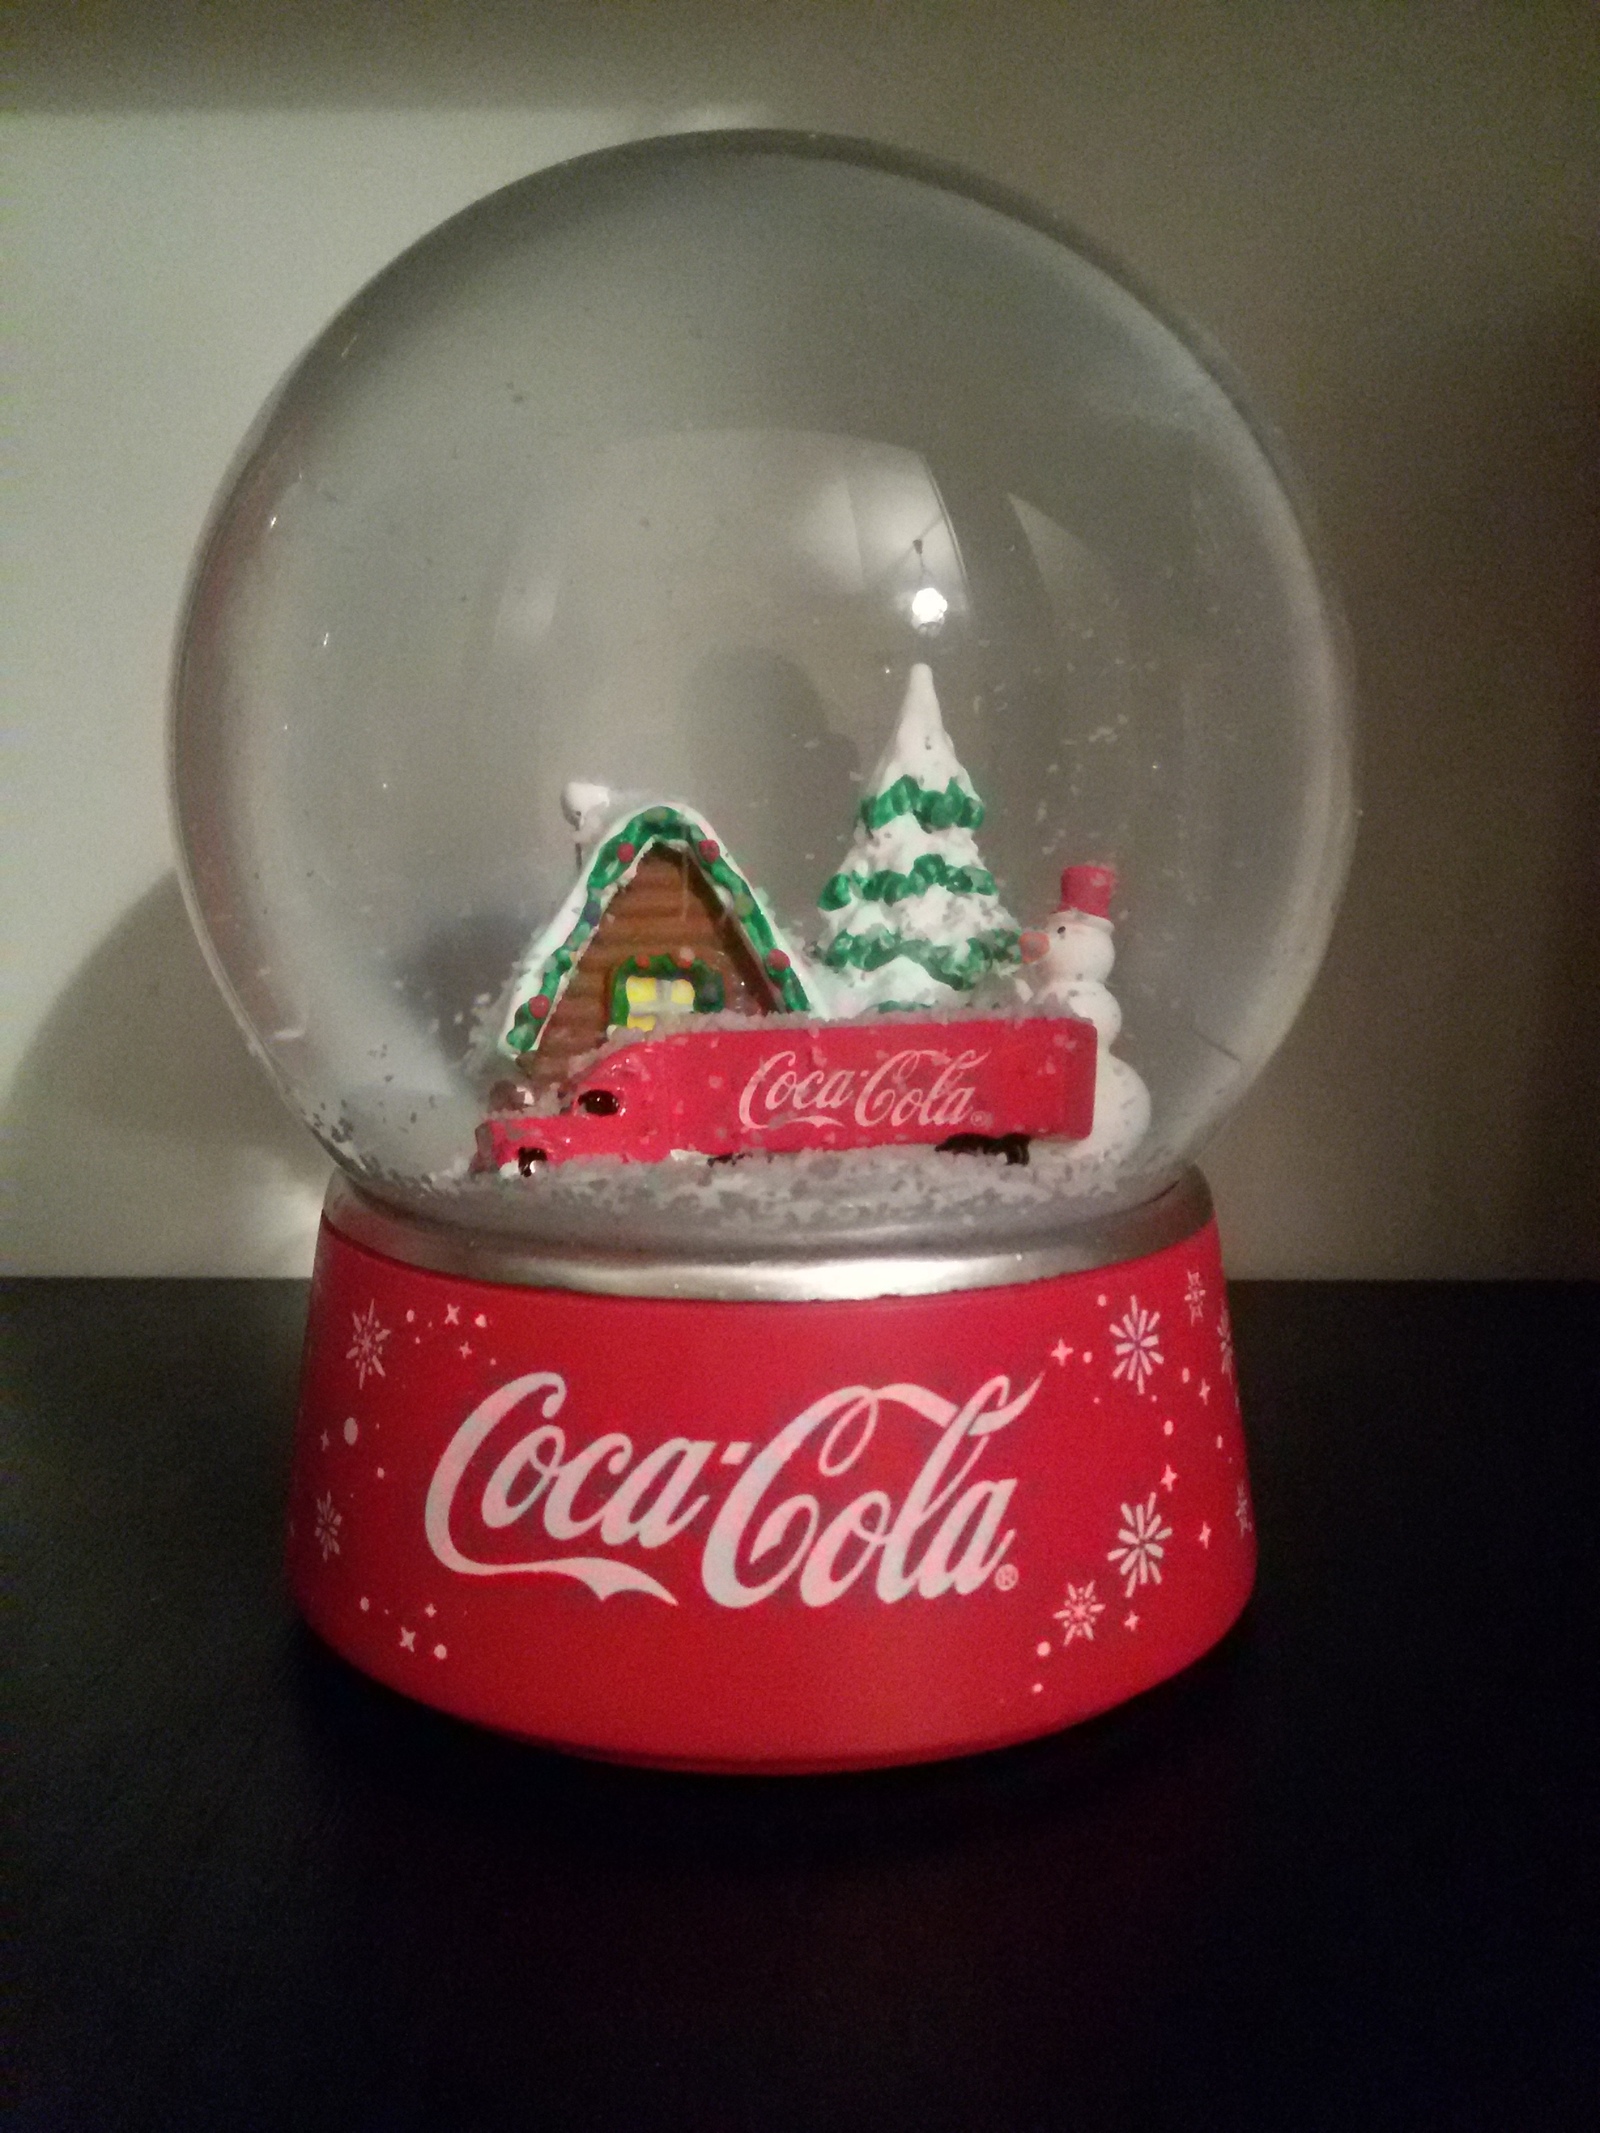 Through Hell for a snow globe from coca-cola - Longpost, Snow Globe, Holidays, New Year, Coca-Cola, My